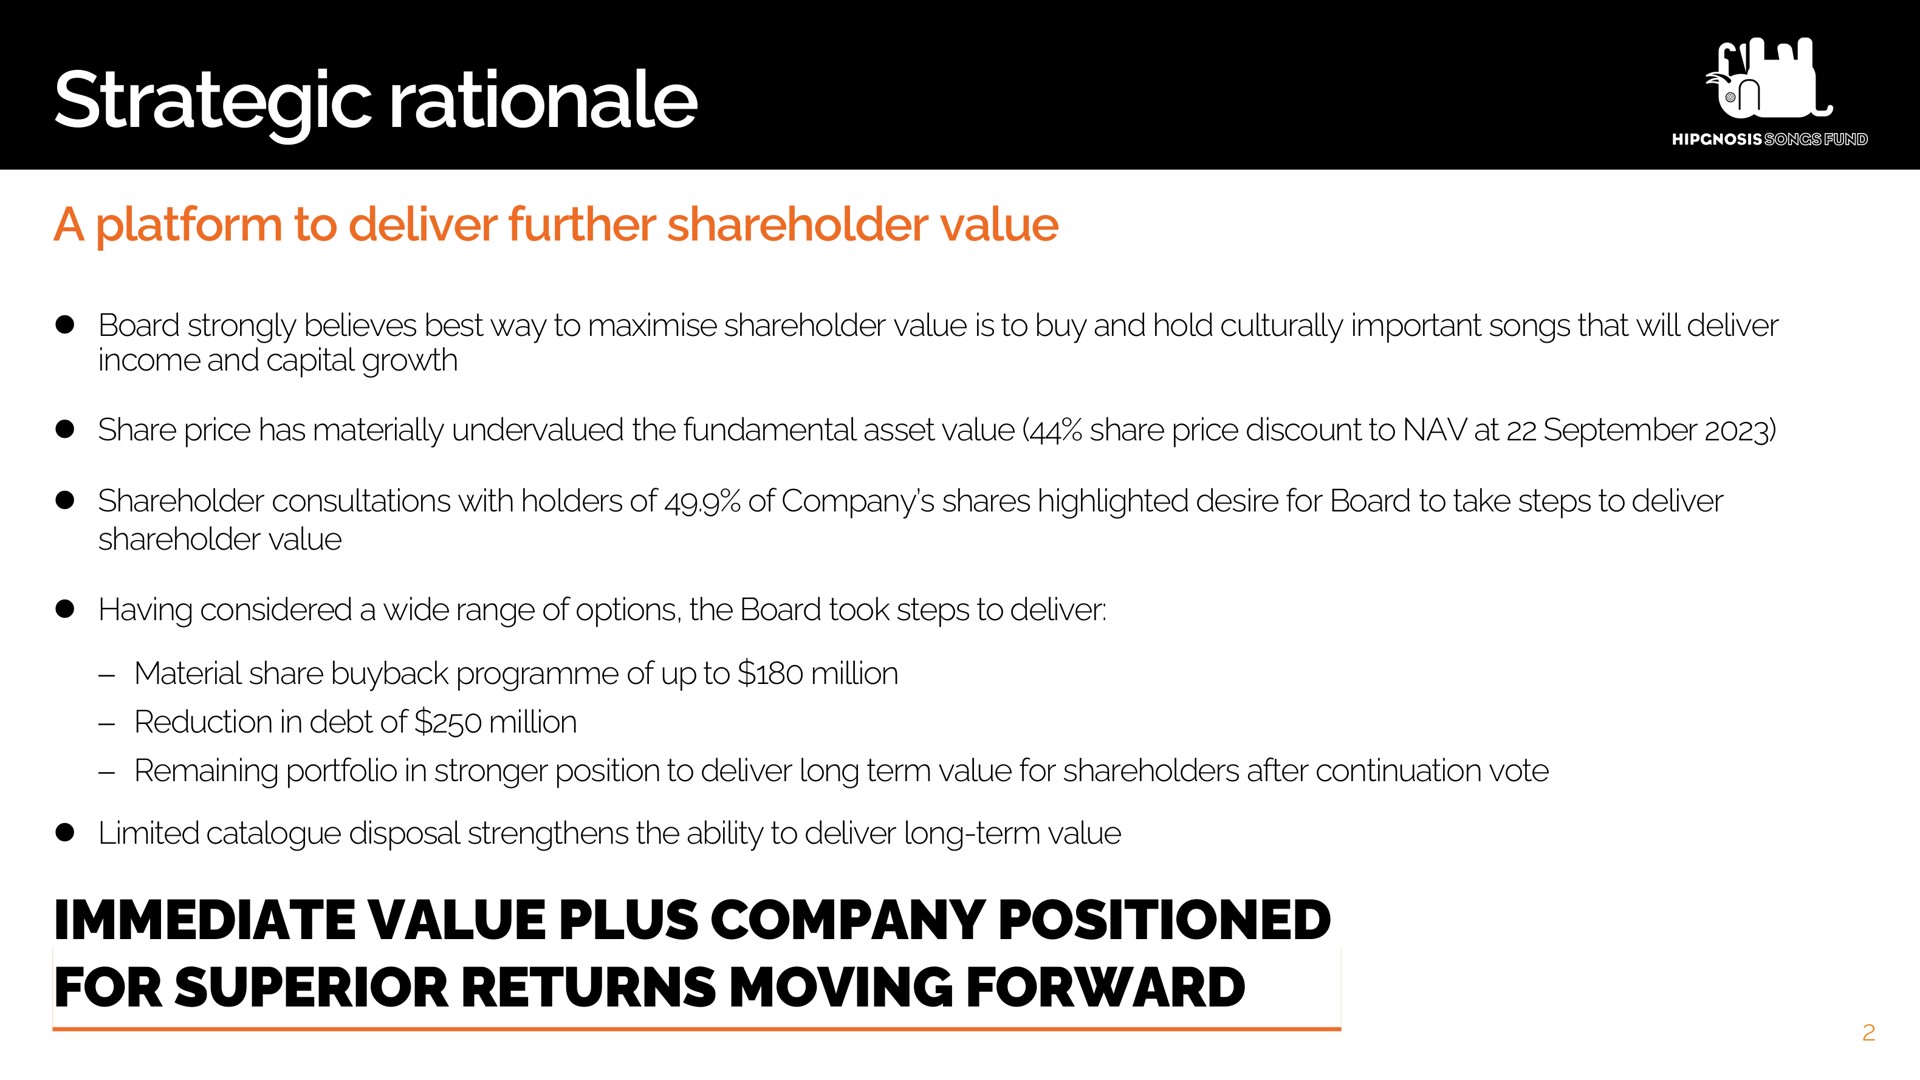 strategic rationale immediate value plus company positioned for superior returns moving forward | Hipgnosis Songs Fund